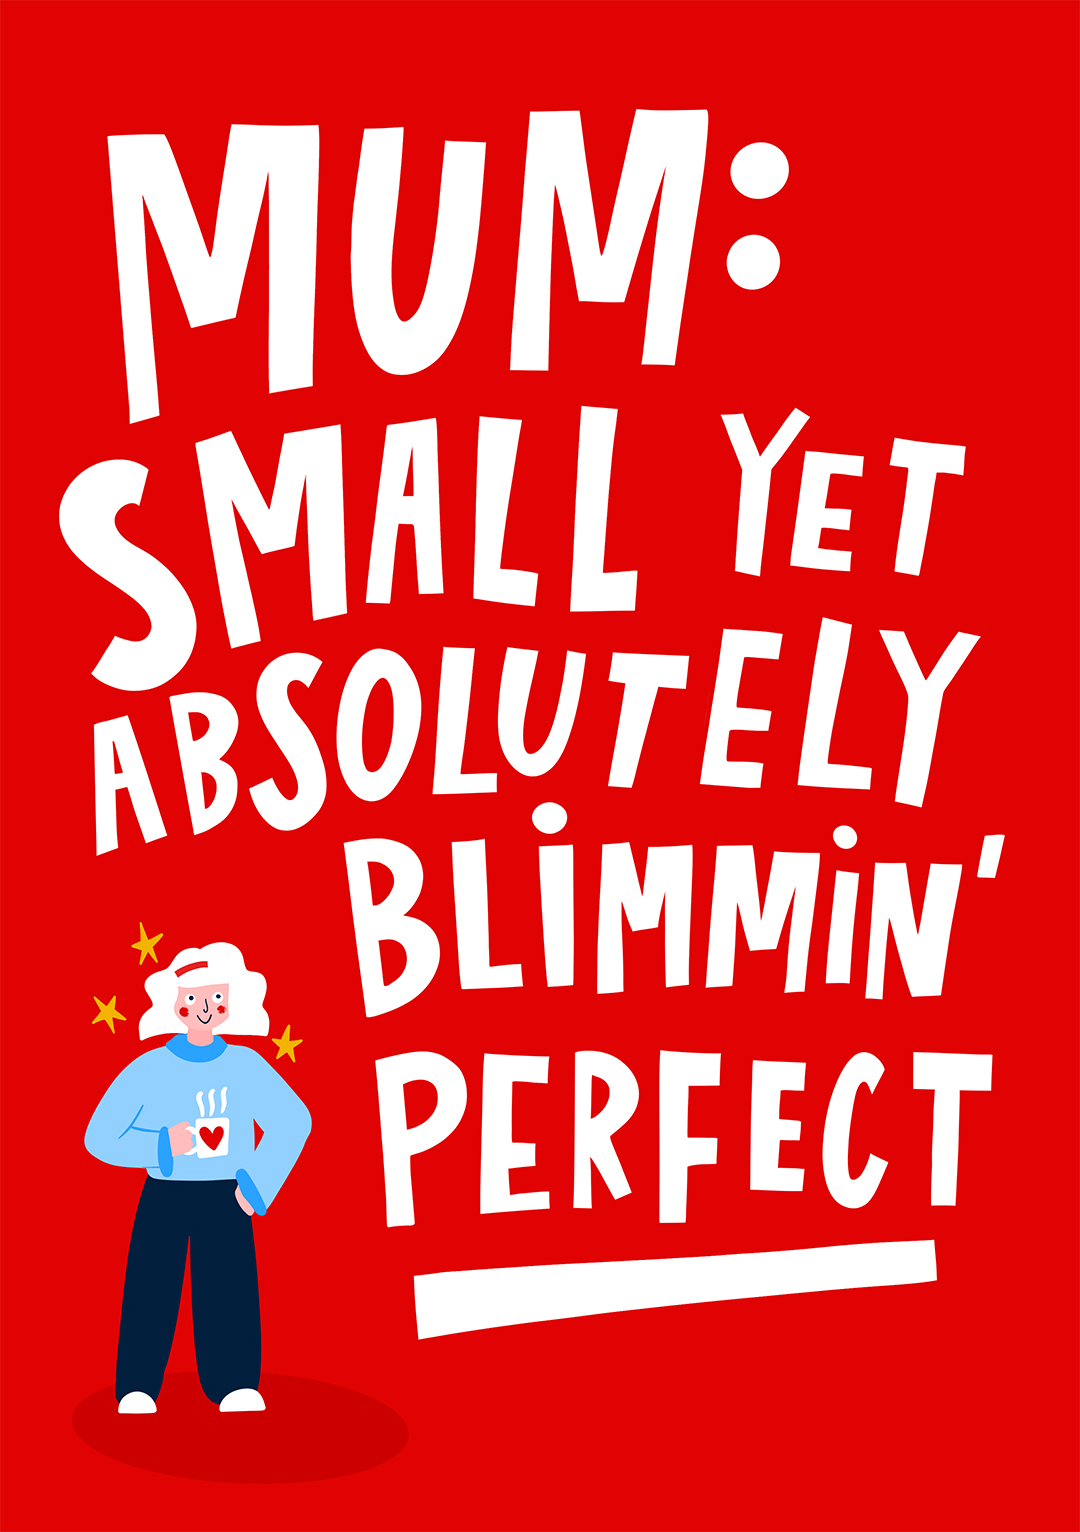 Small Yet Perfect Mum - Mother's Day Card